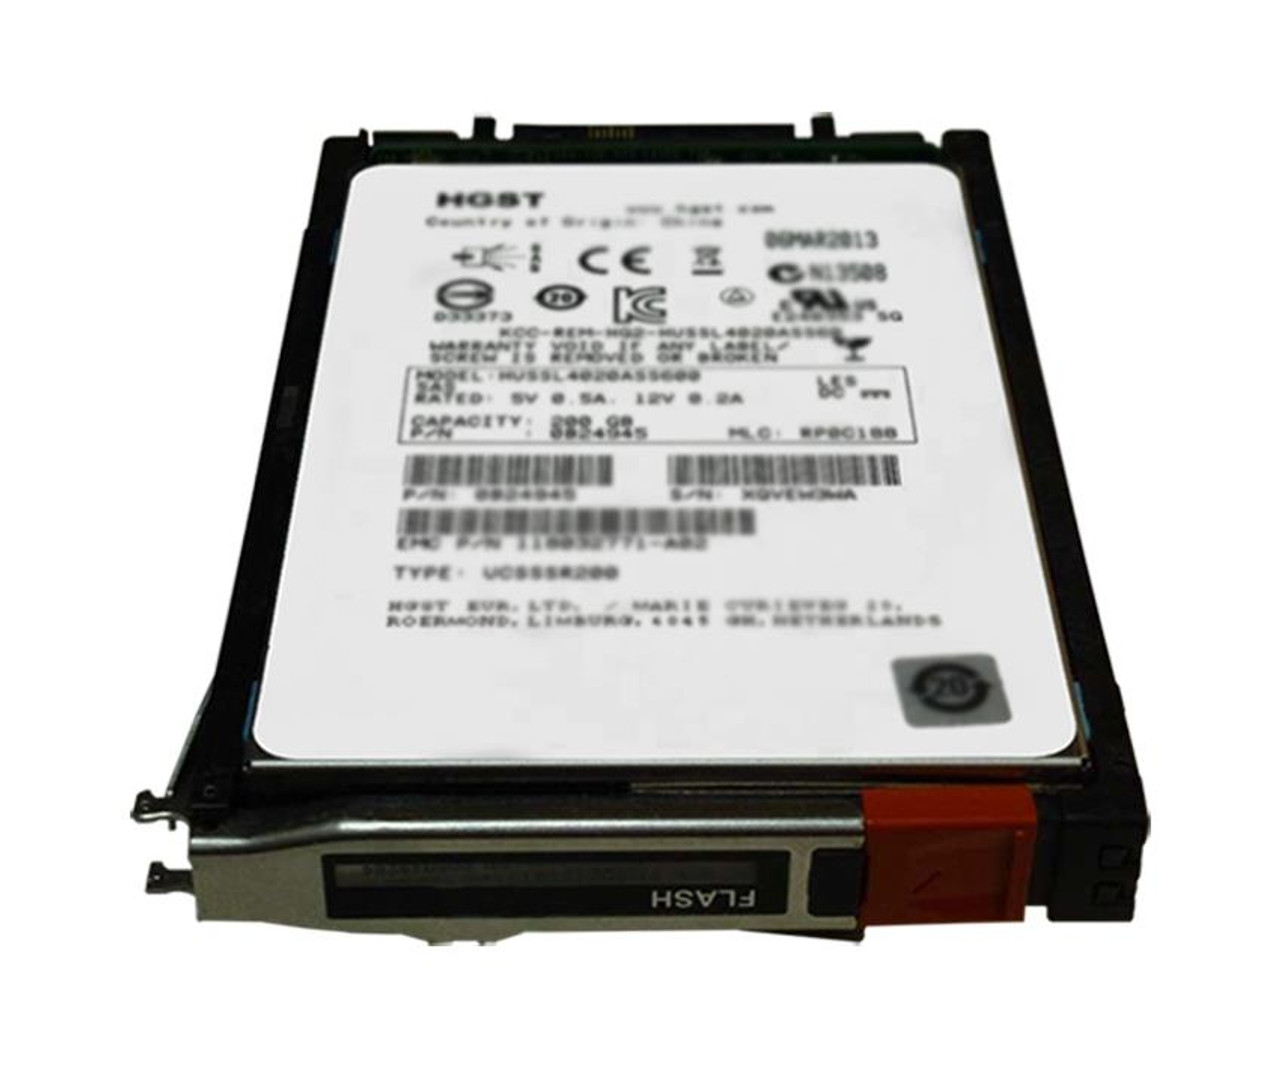 D3F-D2SFXL2-1920 EMC 1.92TB SAS 12Gbps 2.5-inch Internal Solid State Drive (SSD) for Unity AFA 80 x 2.5 Enclosure